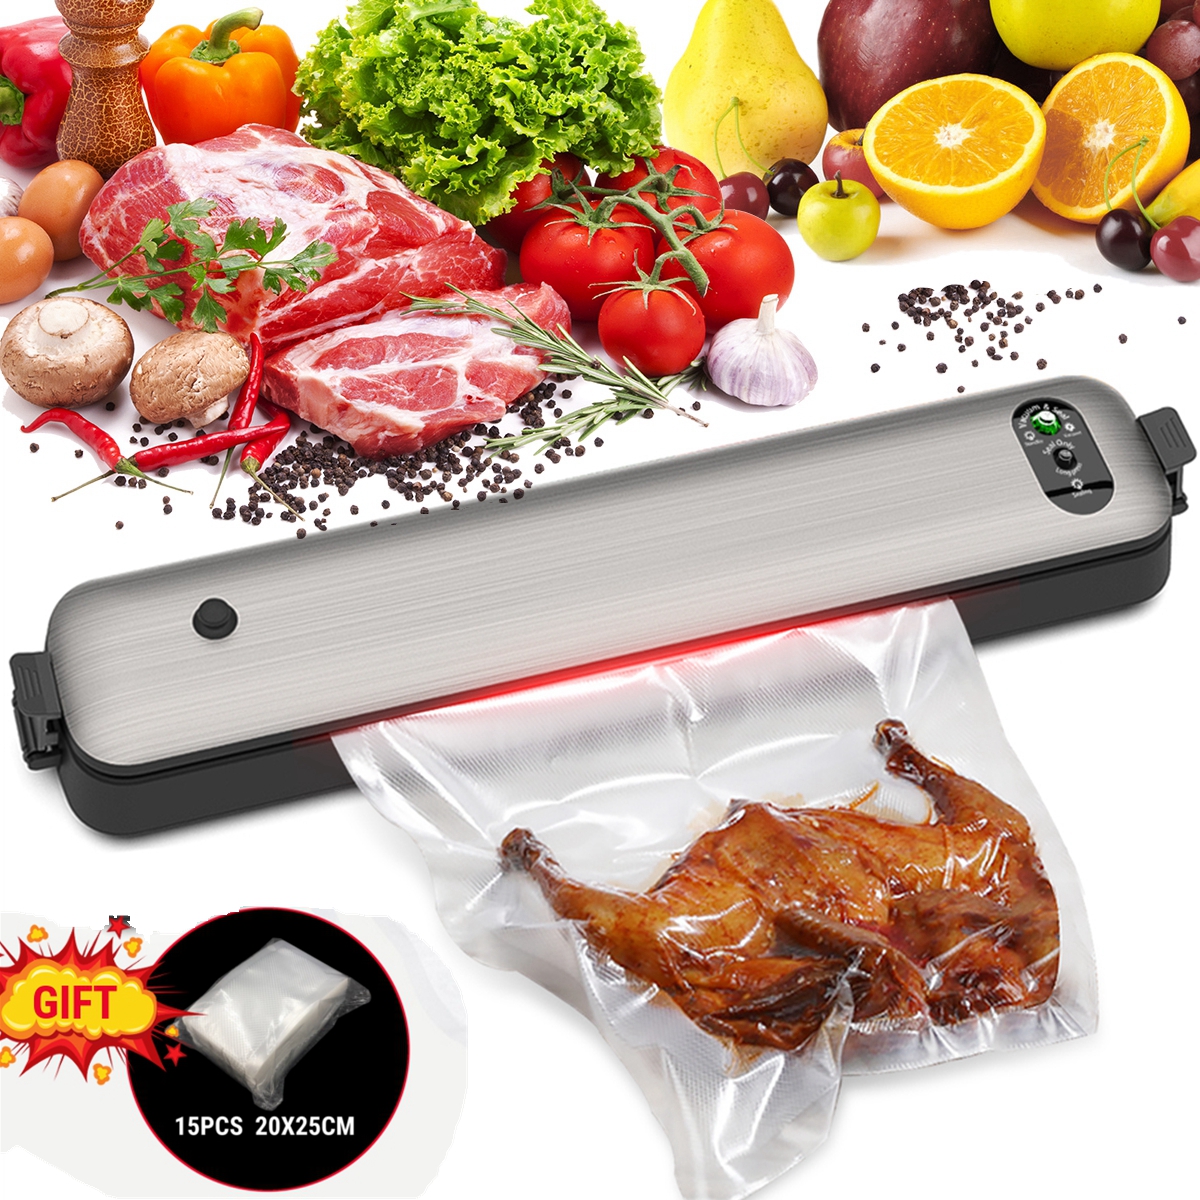 Household-Vacuum-Sealer-Machine-Seal-Meal-Food-Vacuum-Sealer-System-with-15-Free-Bags-One-Touch-Cont-1938046-2